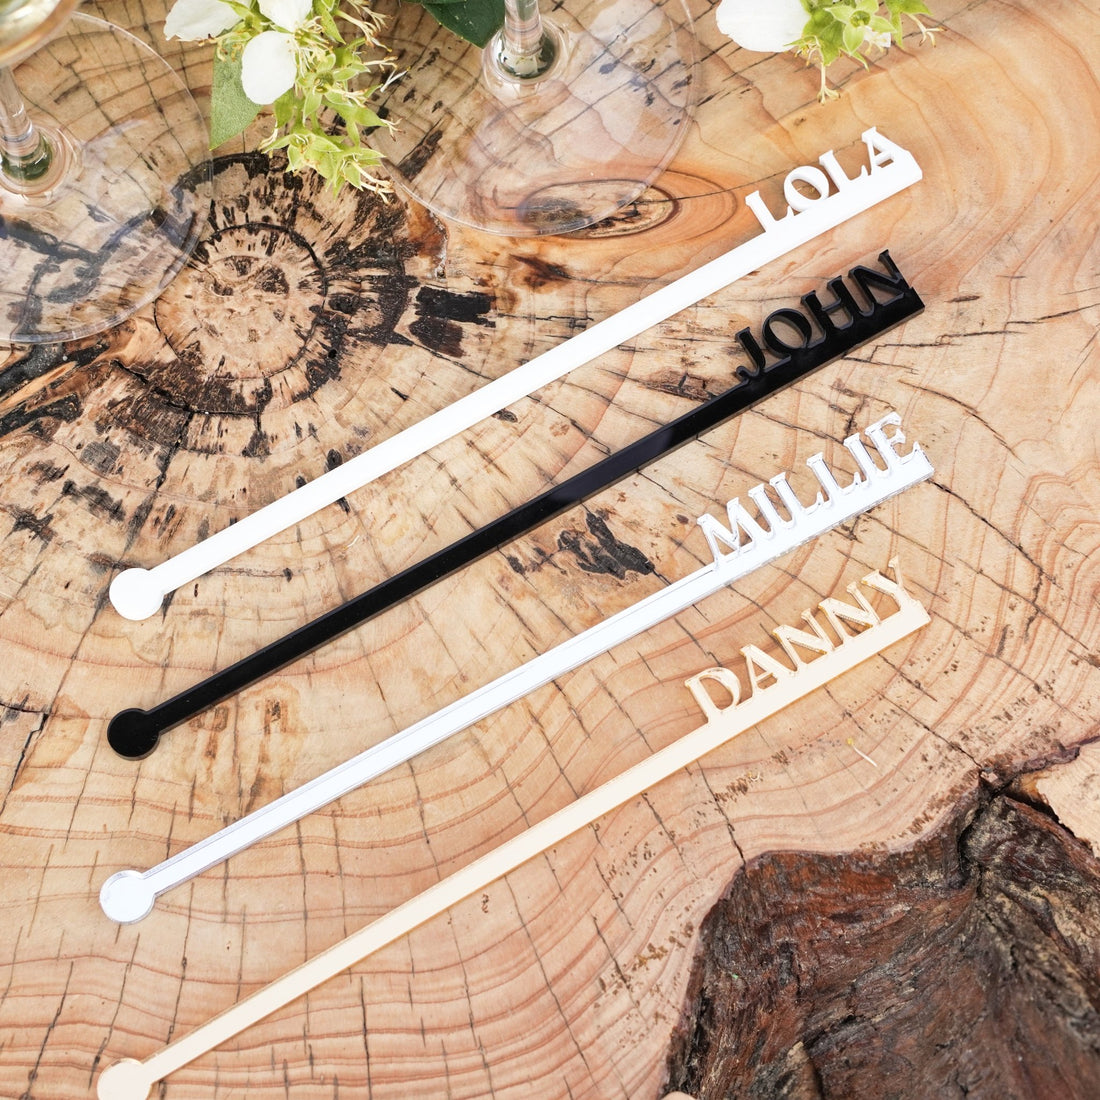 Personalised Drink Stirrer Place Names in Gold Silver Black by